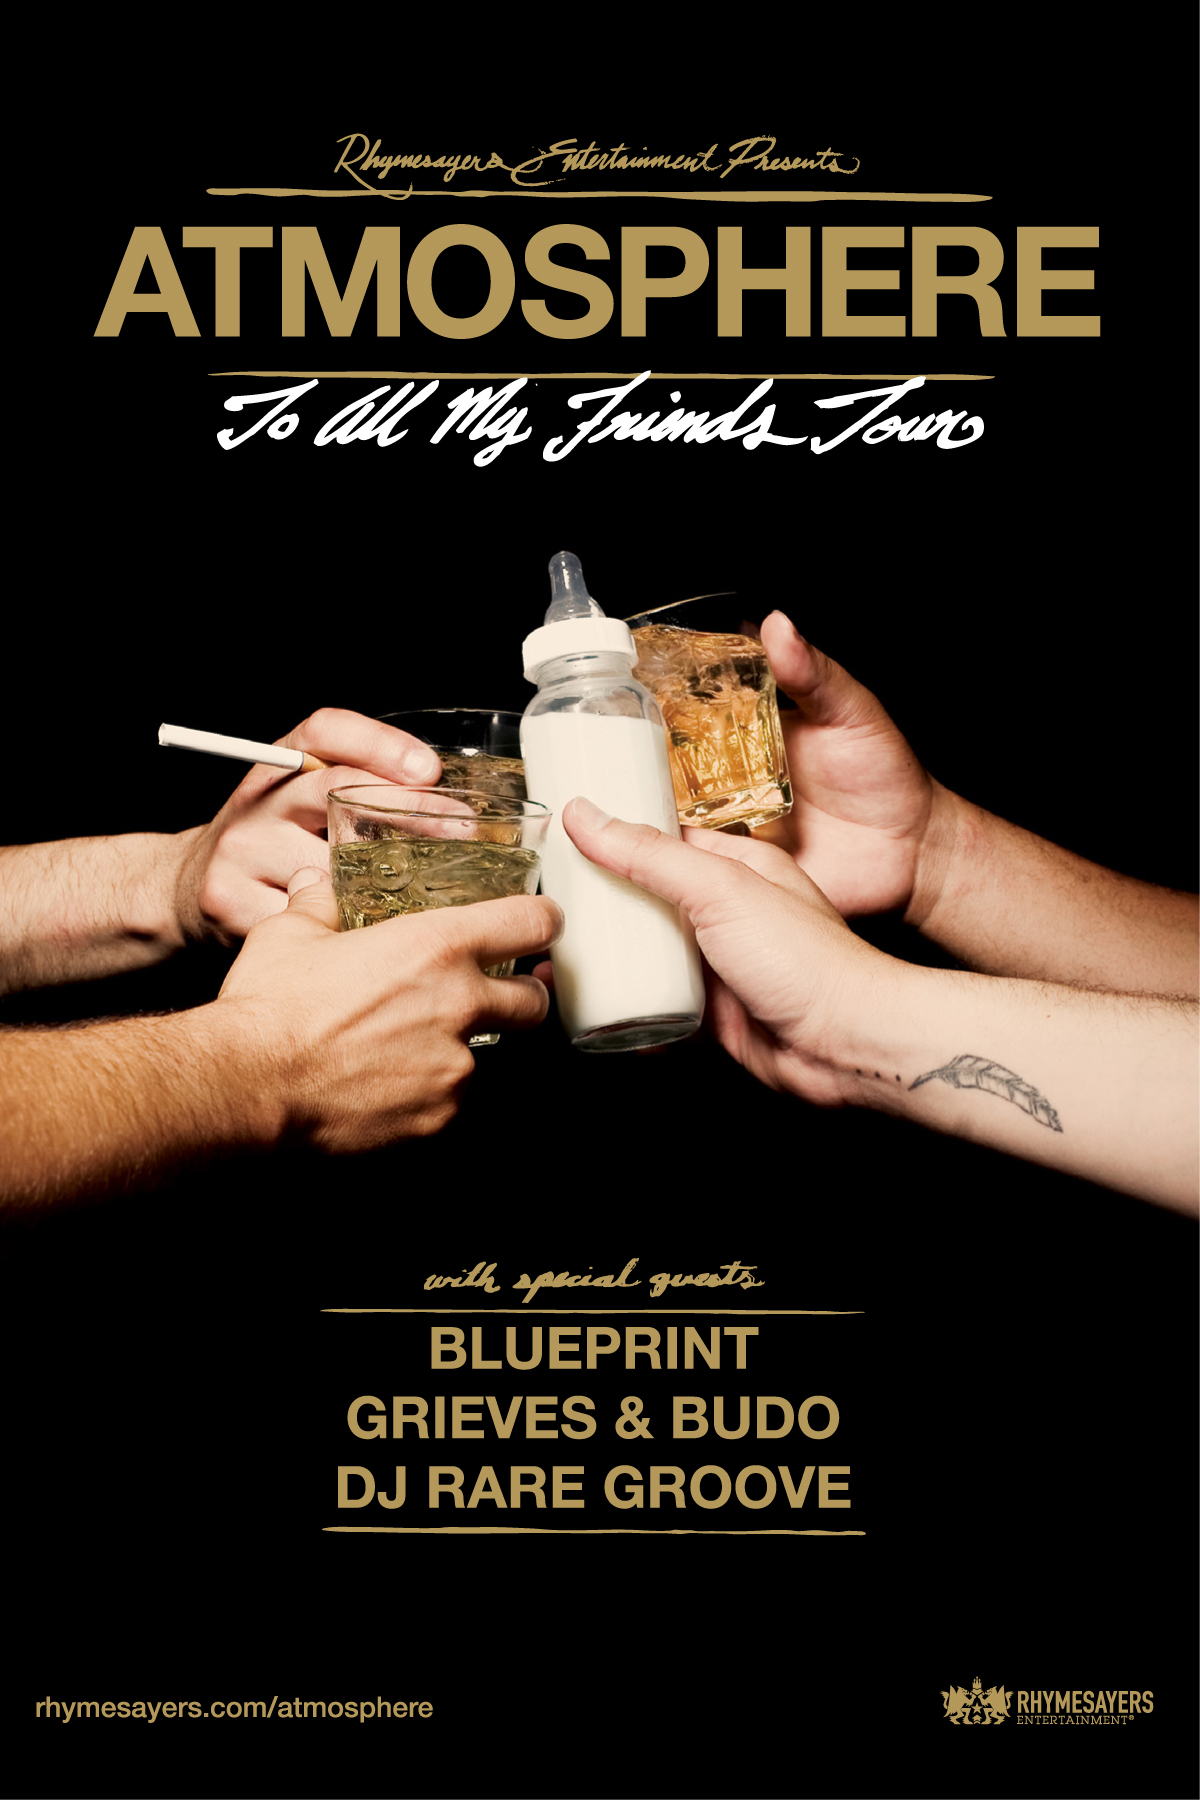 Atmosphere "To All My Friends Tour" featuring Blueprint